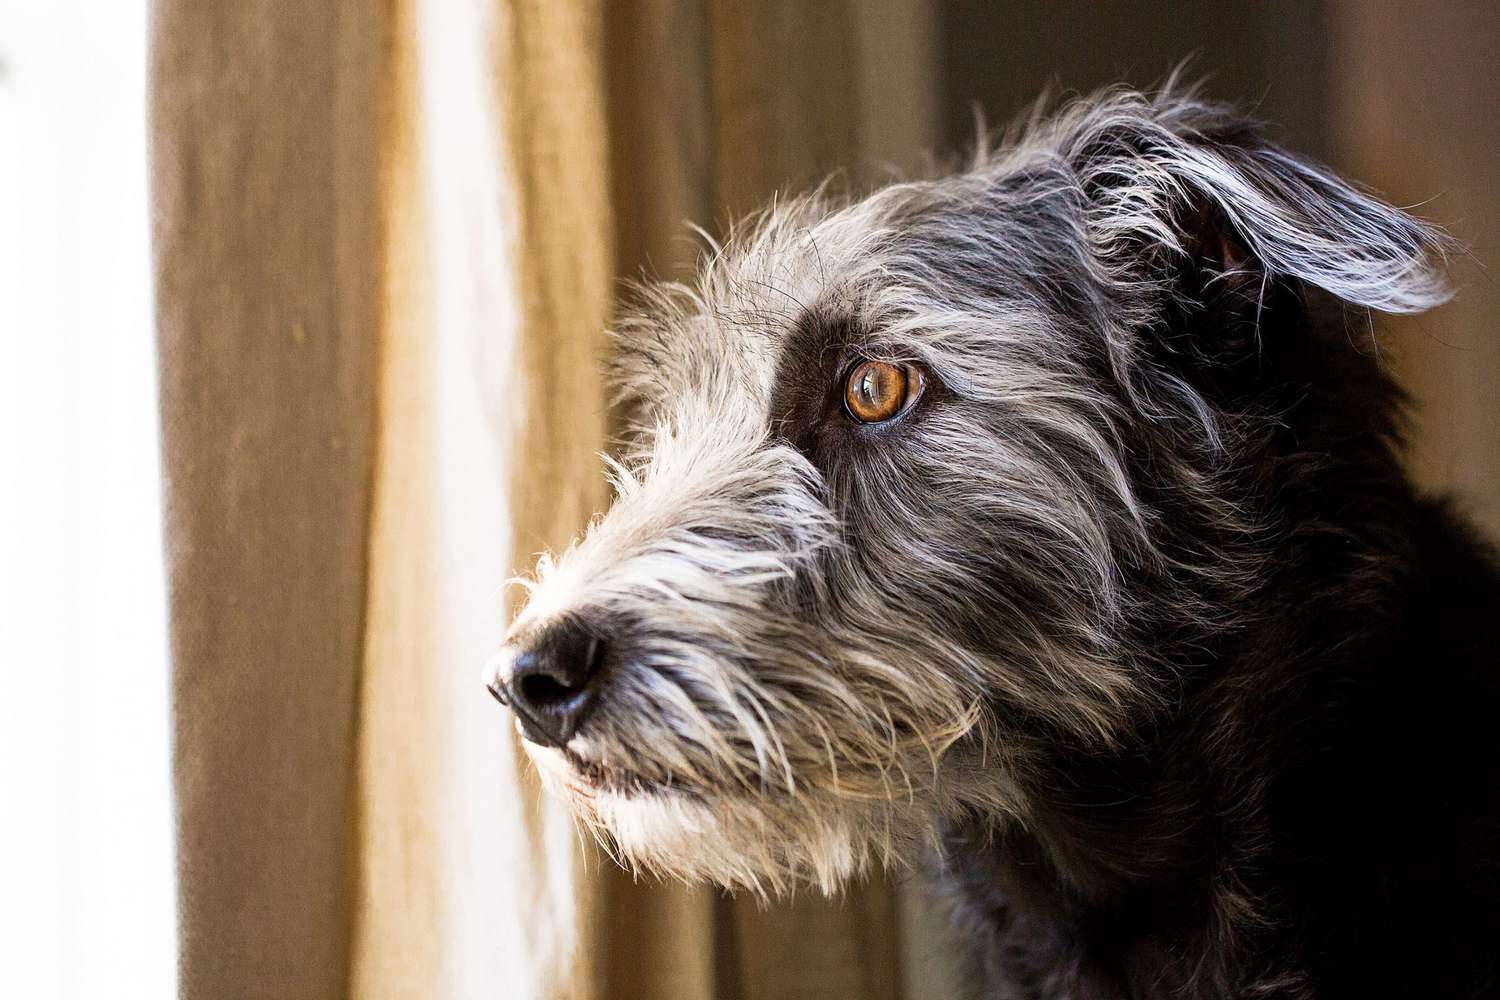 terrier looking out the window